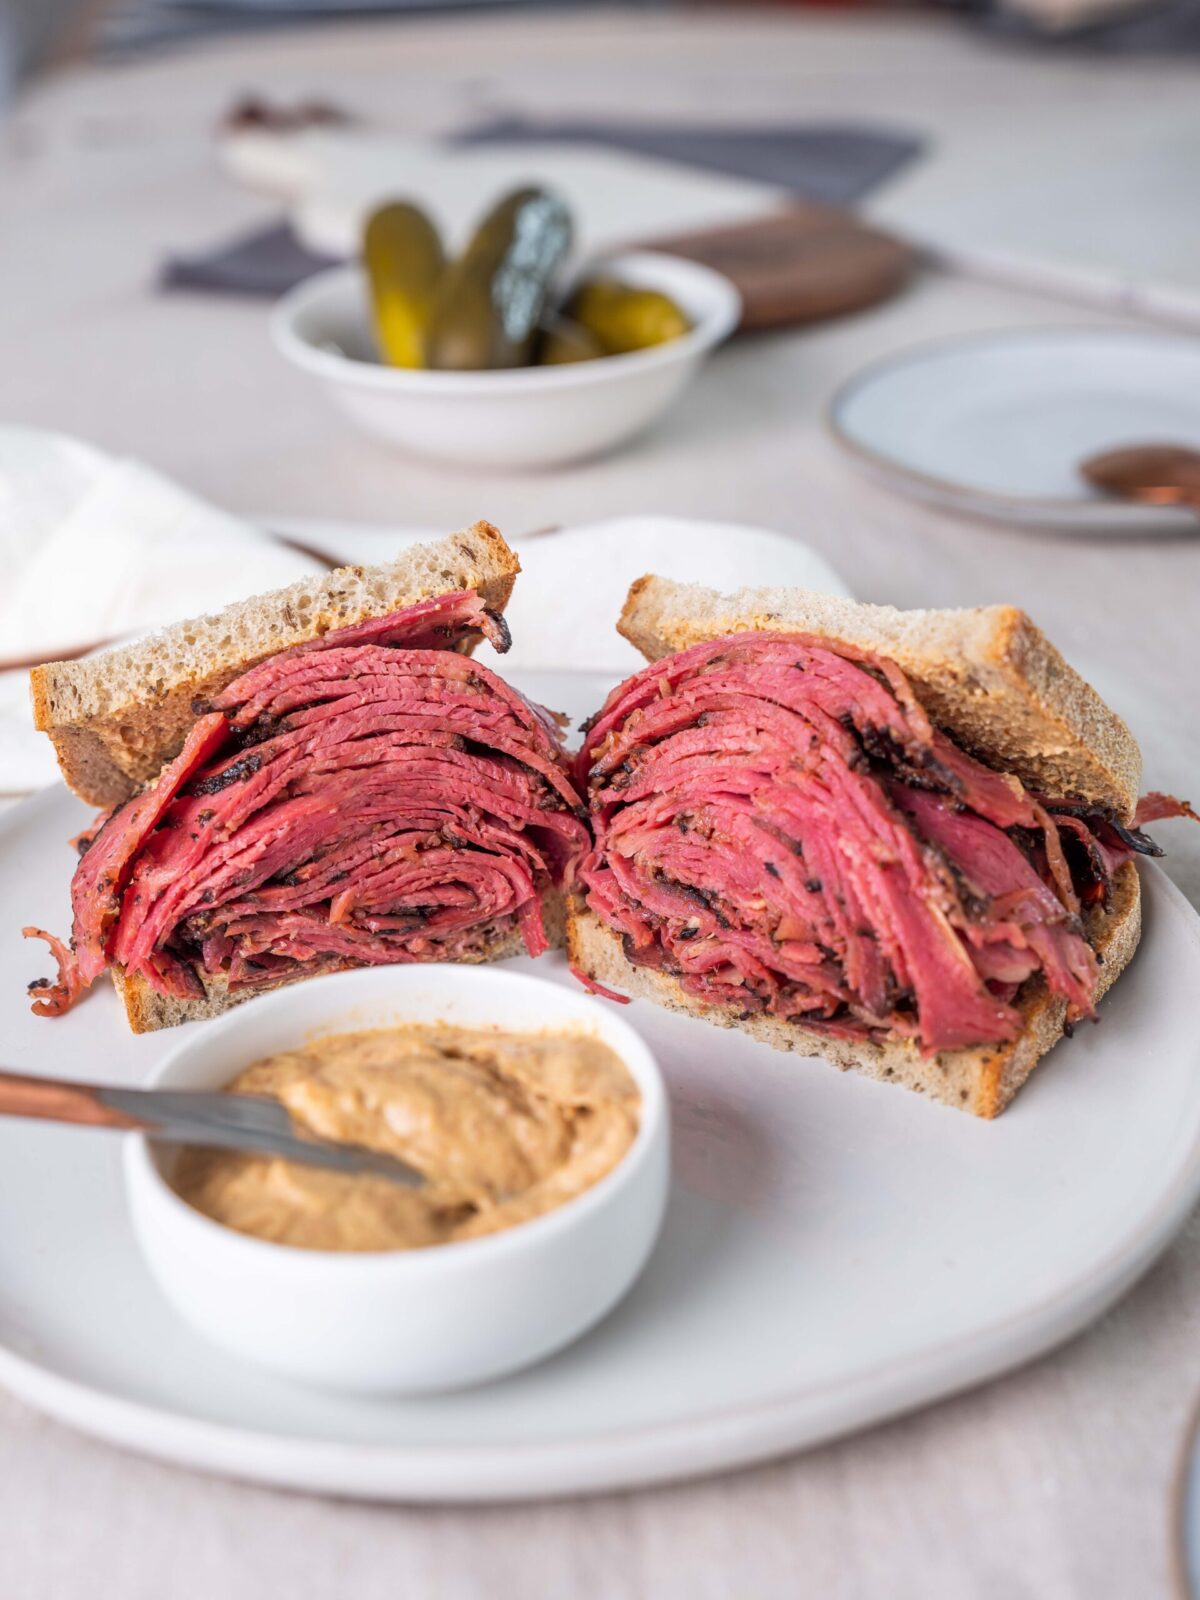 The Best Jewish Deli Food You Can Buy Online